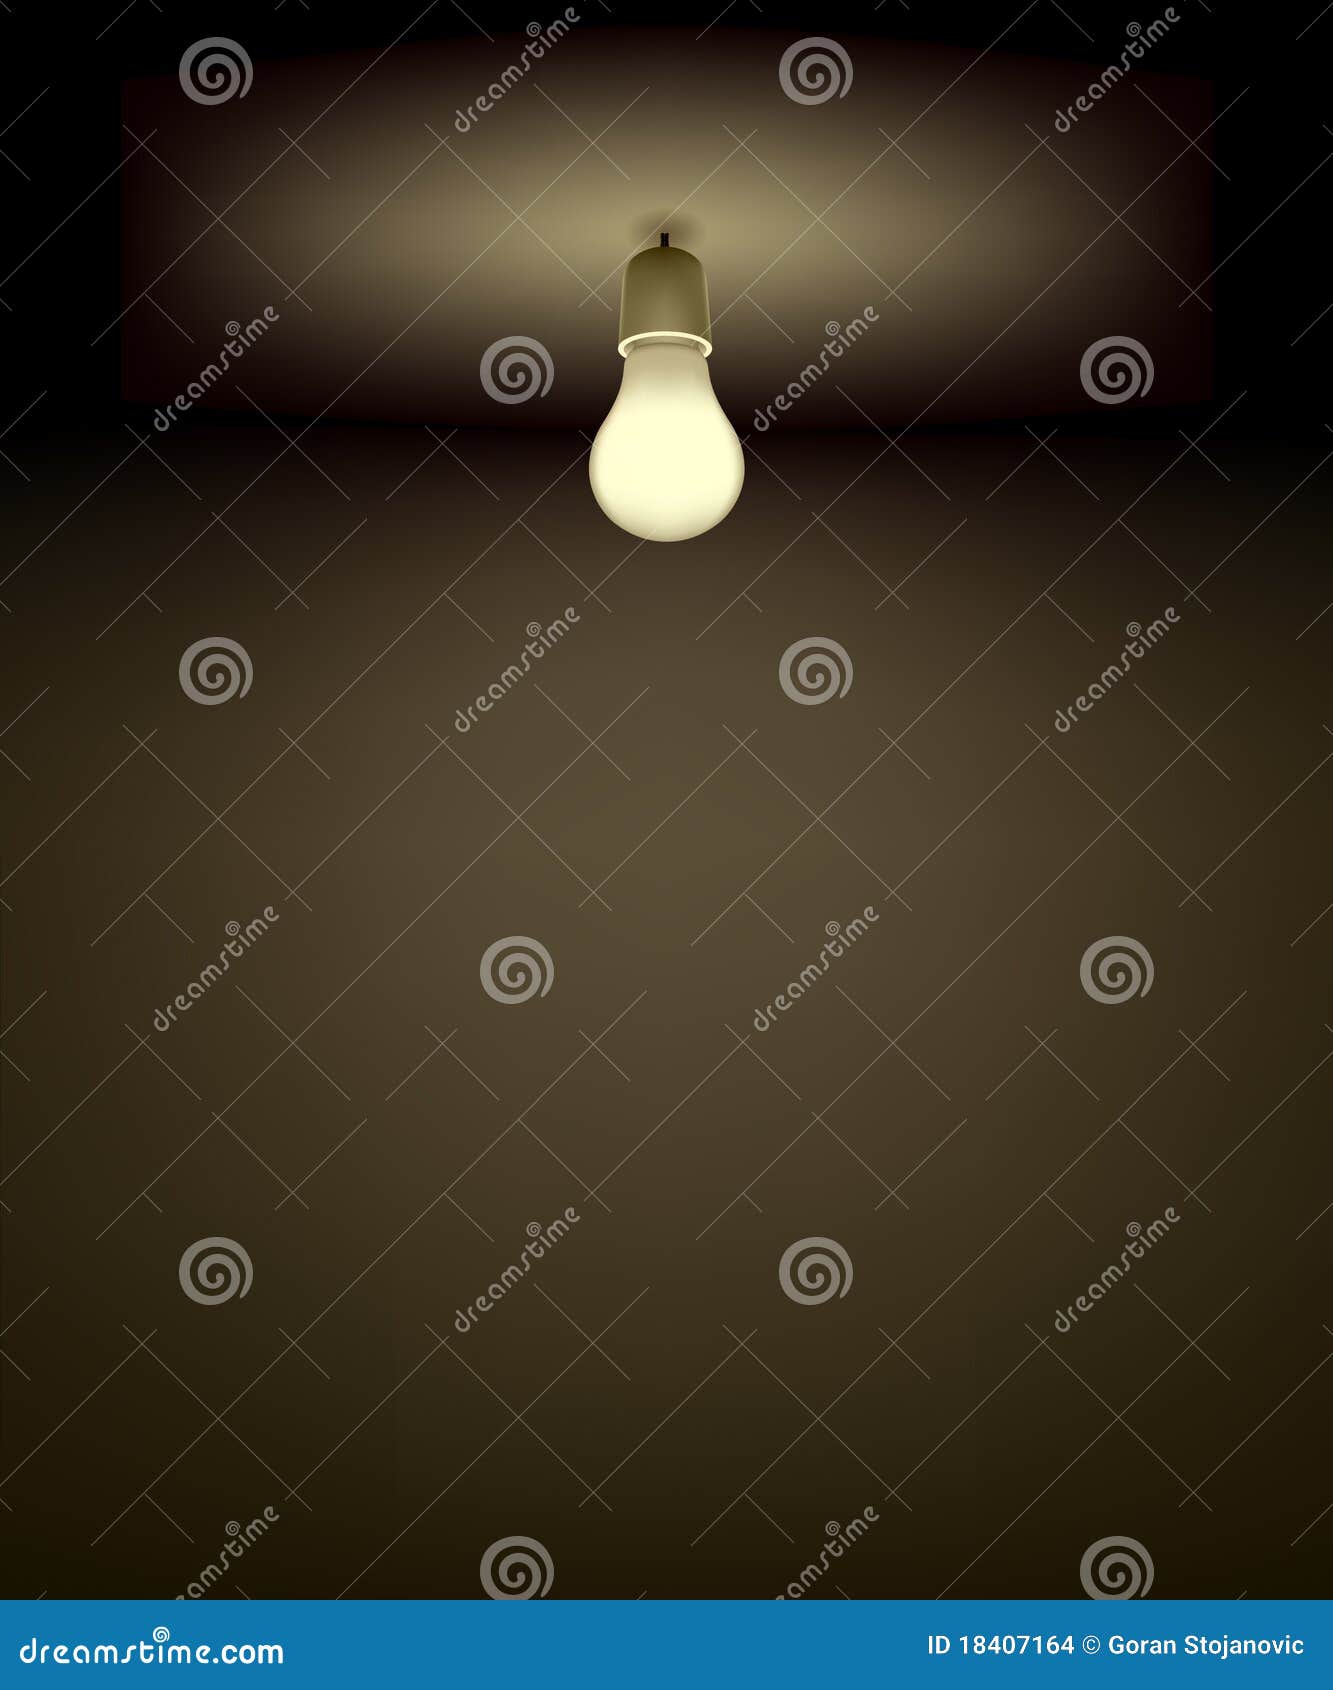 Vector classic light bulb on the dark room.rnFile contains Gradient mesh